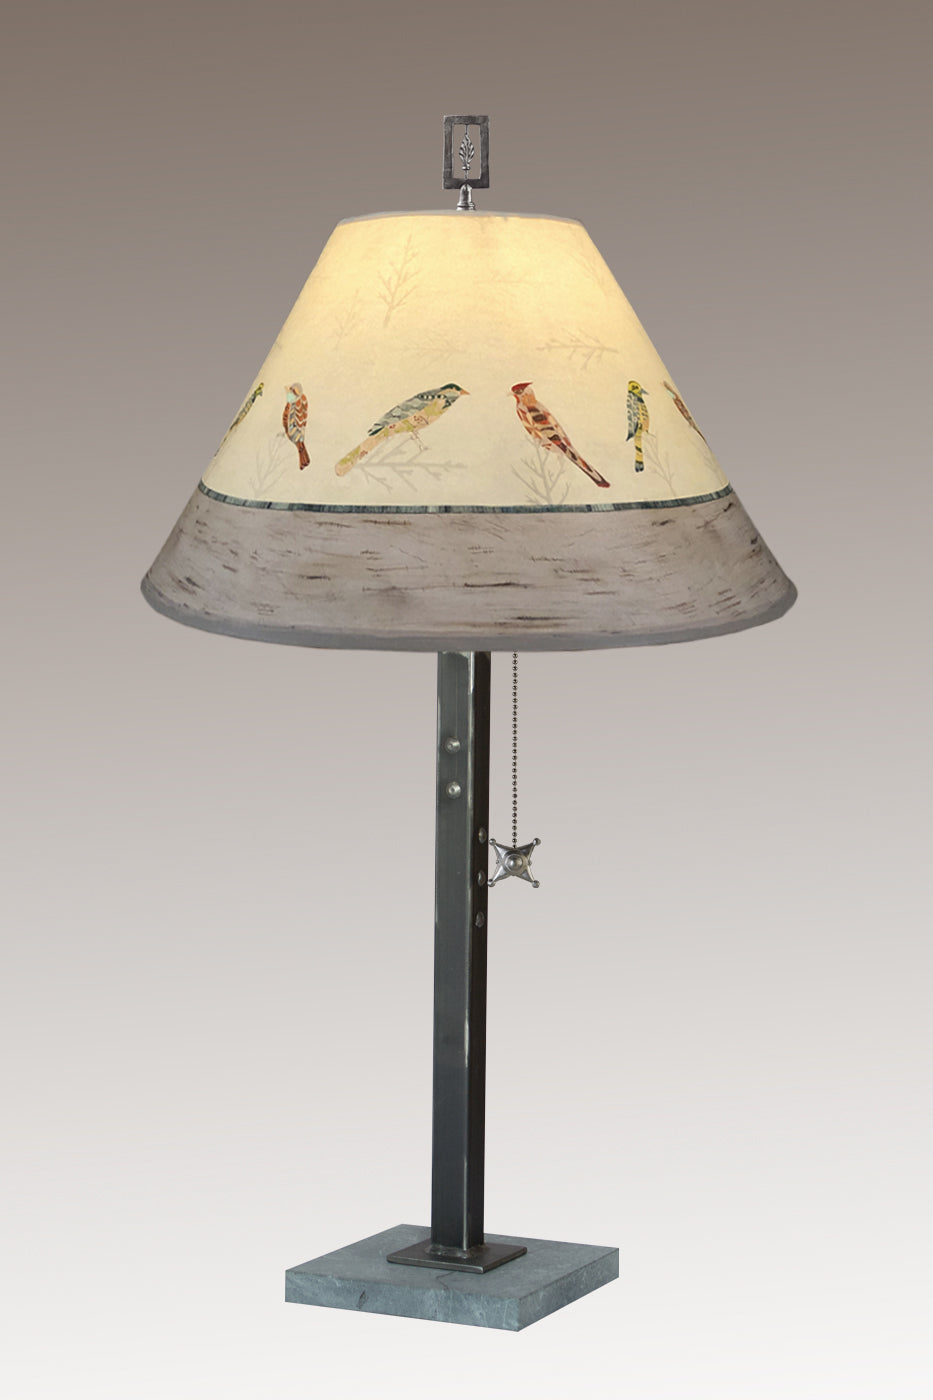 Janna Ugone &amp; Co Table Lamps Steel Table Lamp with Medium Conical Shade in Bird Friends